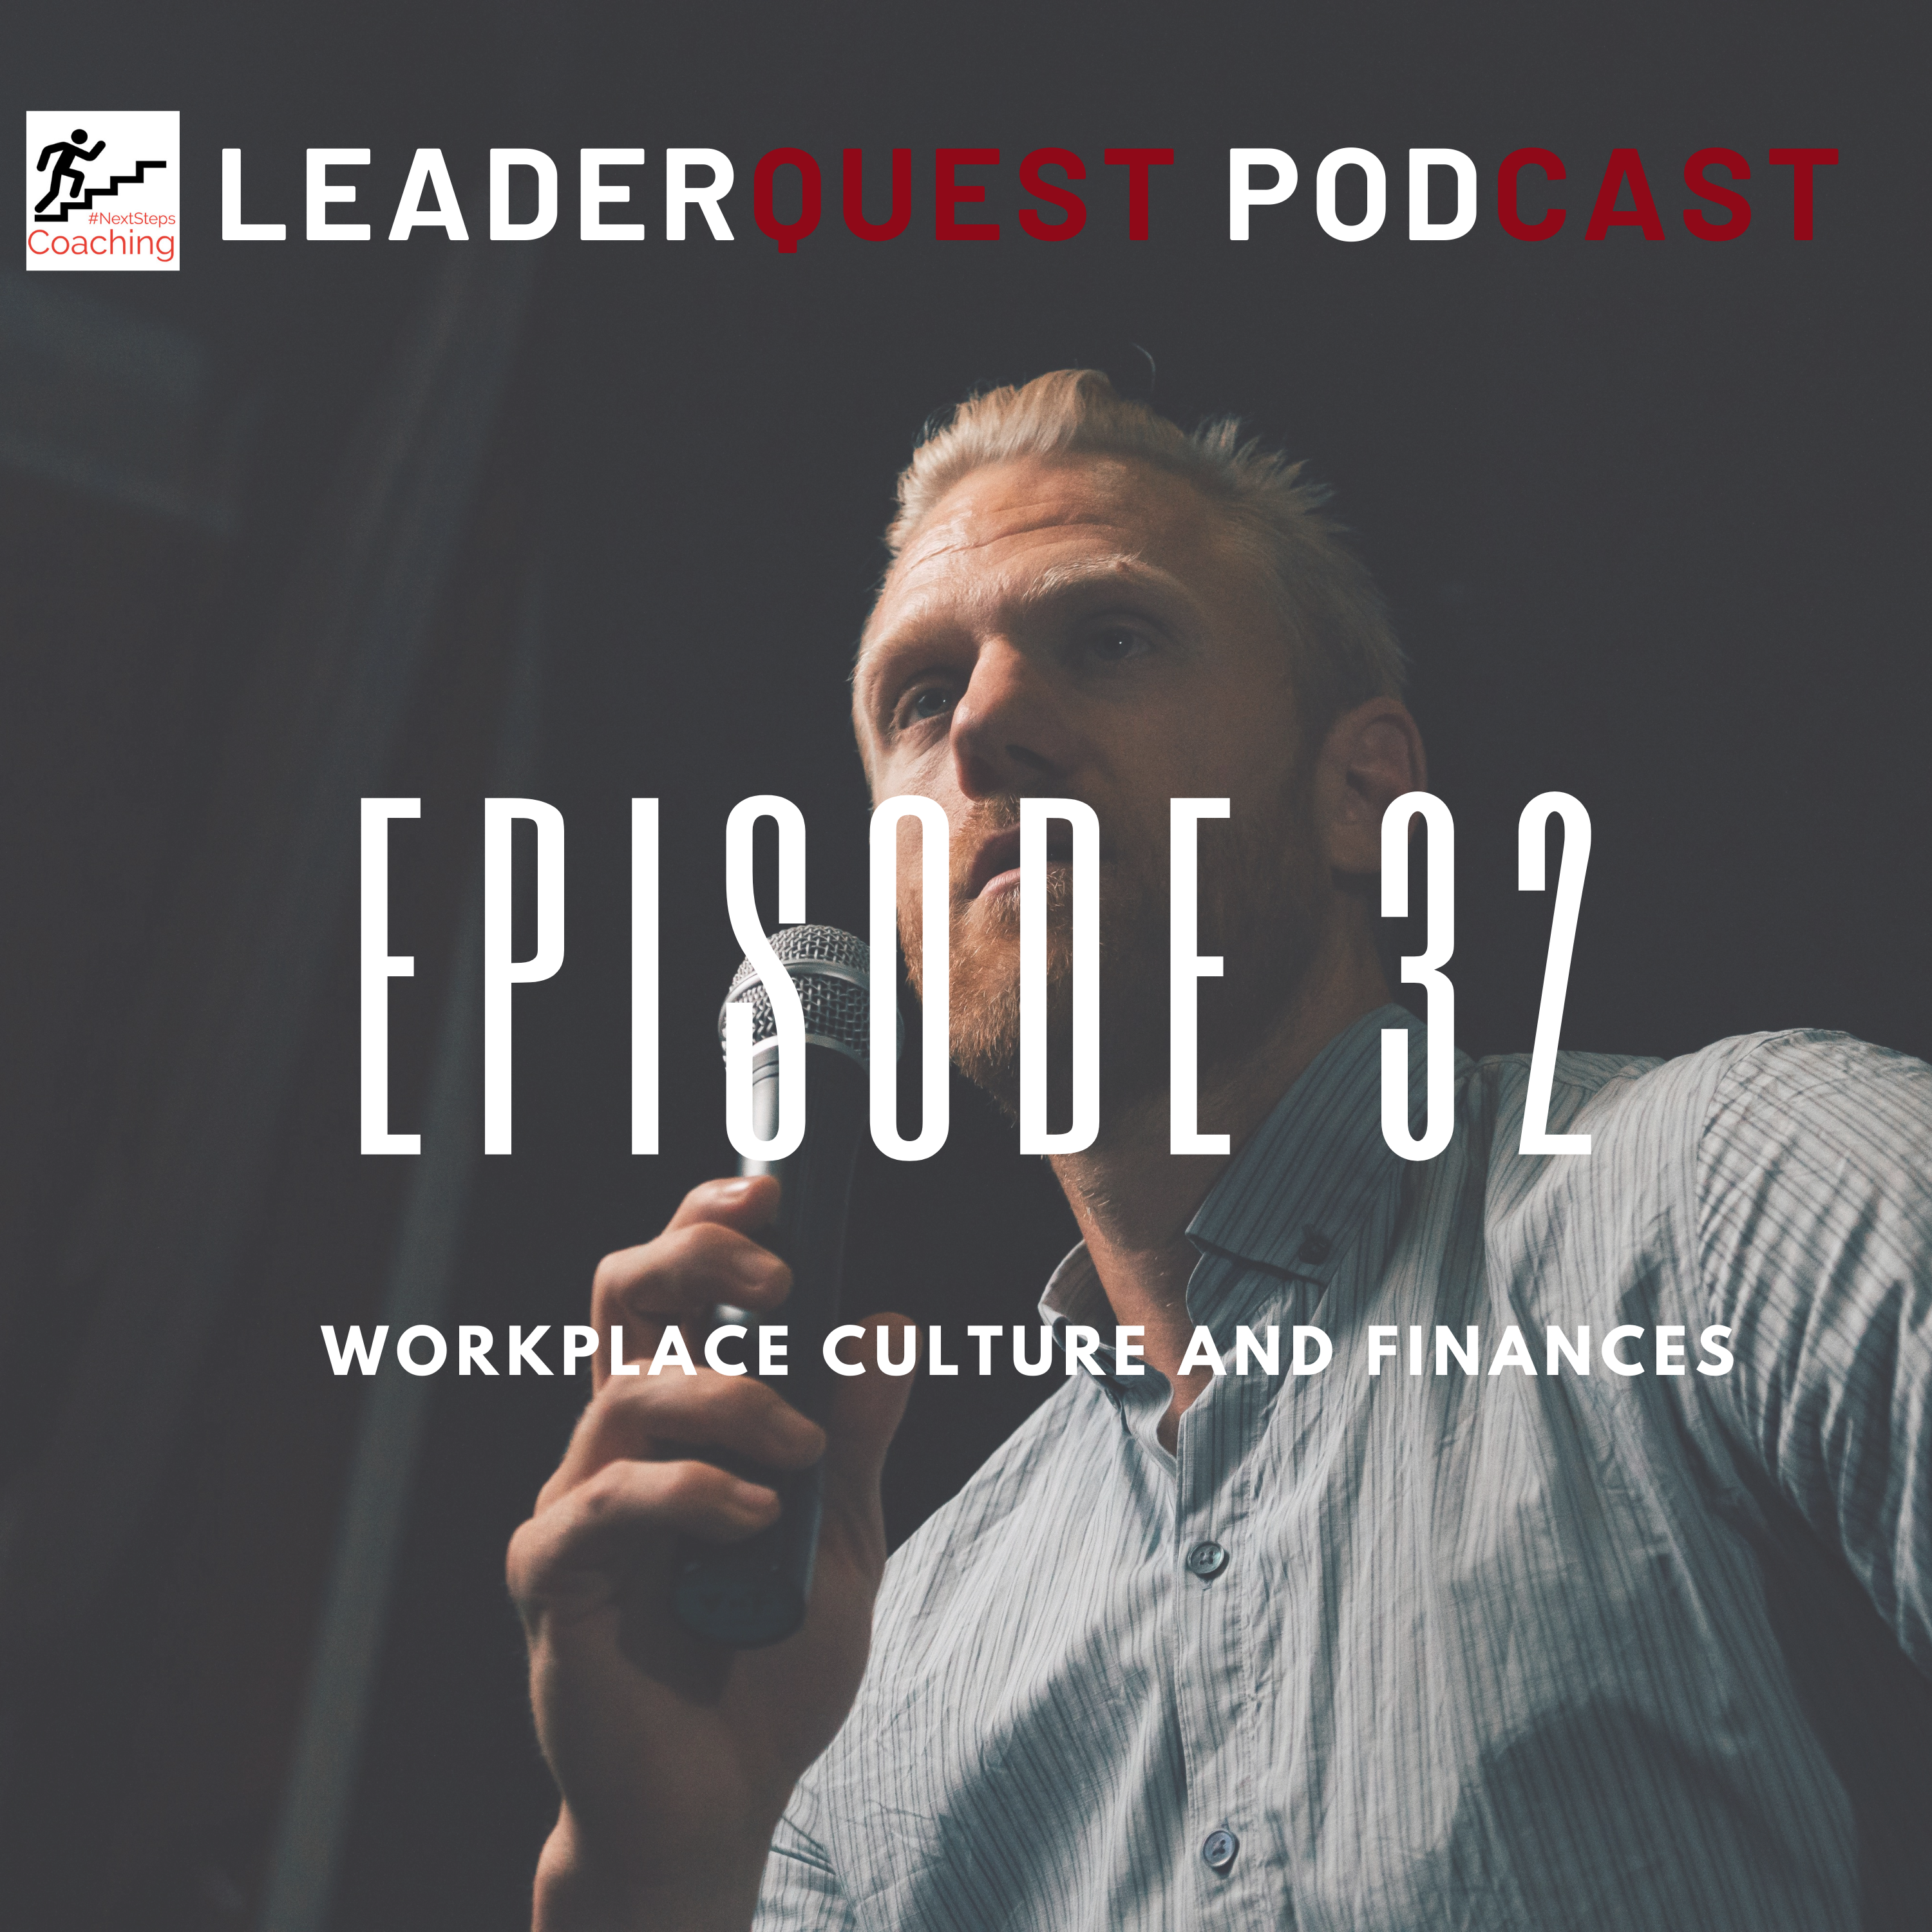 Episode 32 Podcast Cover Workplace Culture and Finance